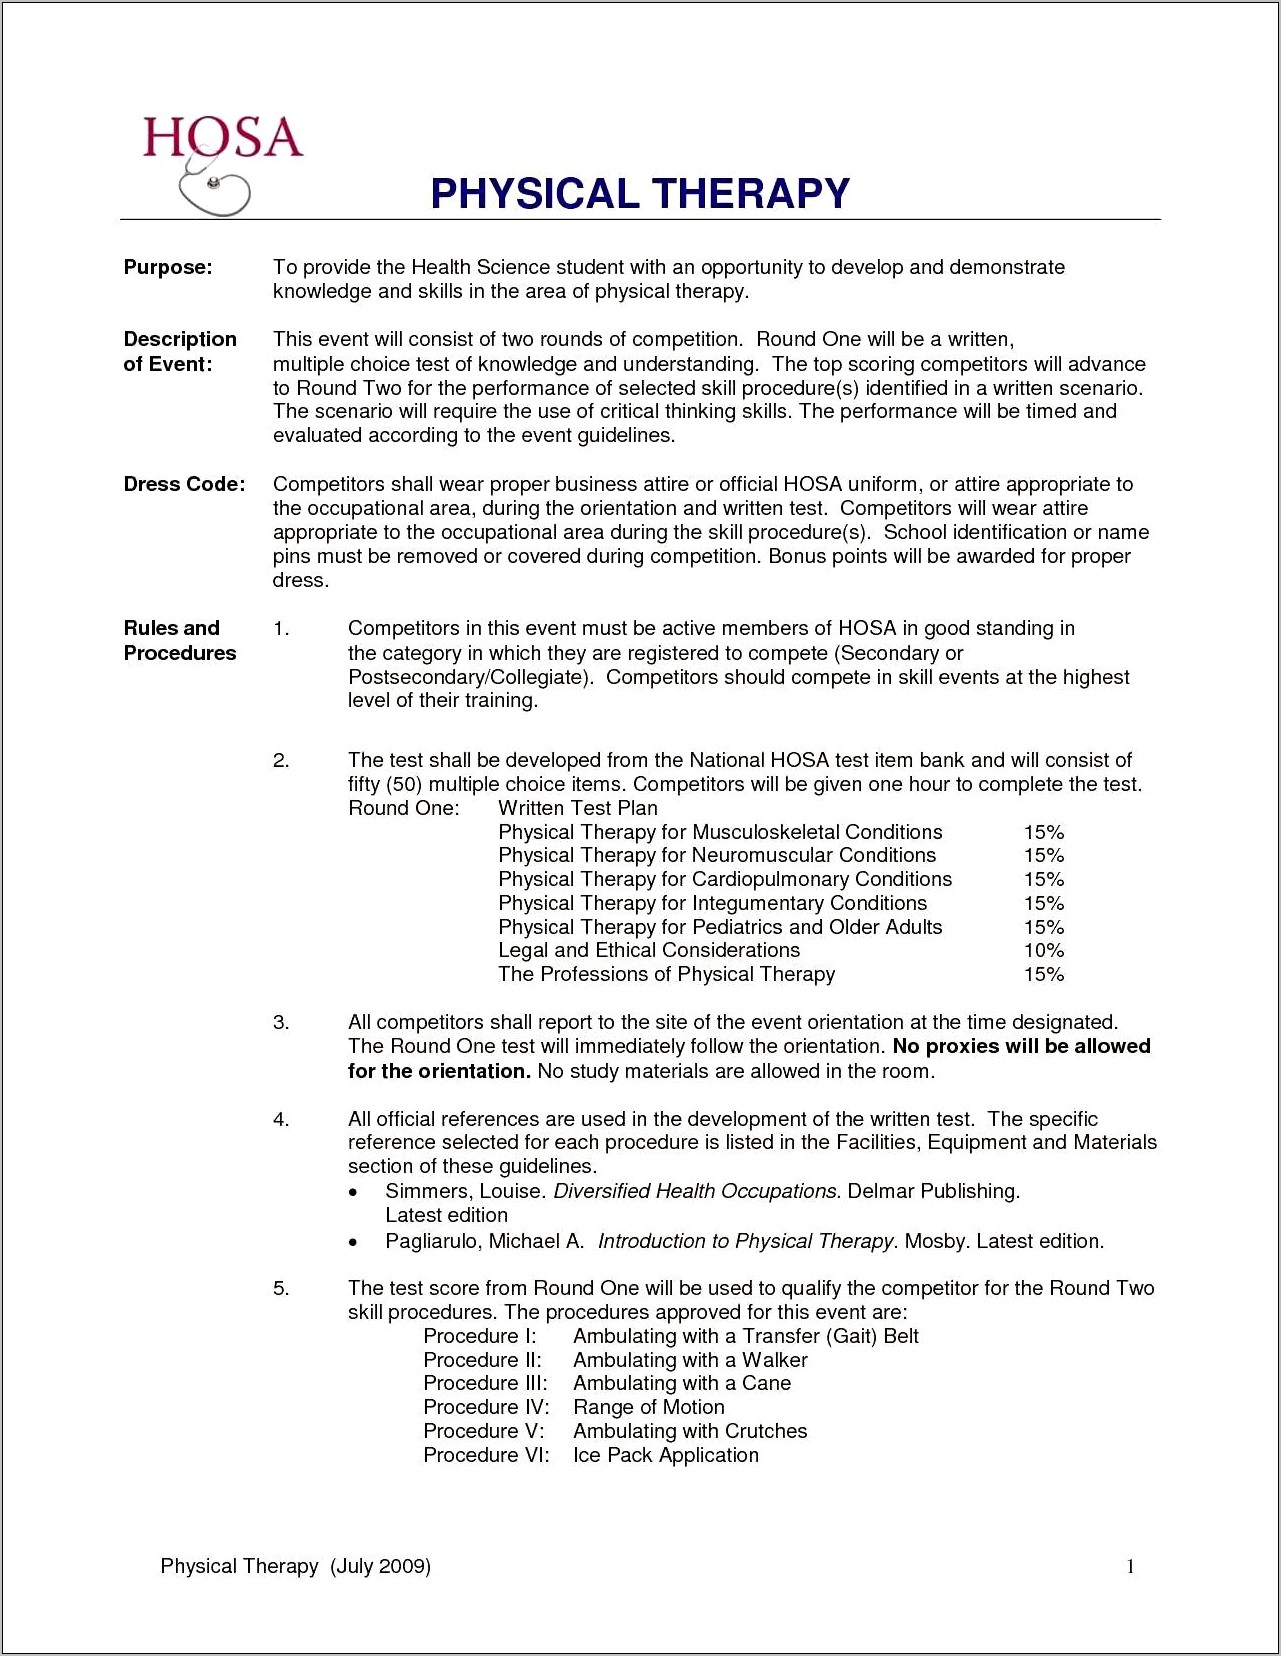 Skills For Physical Therapy Aide Resume